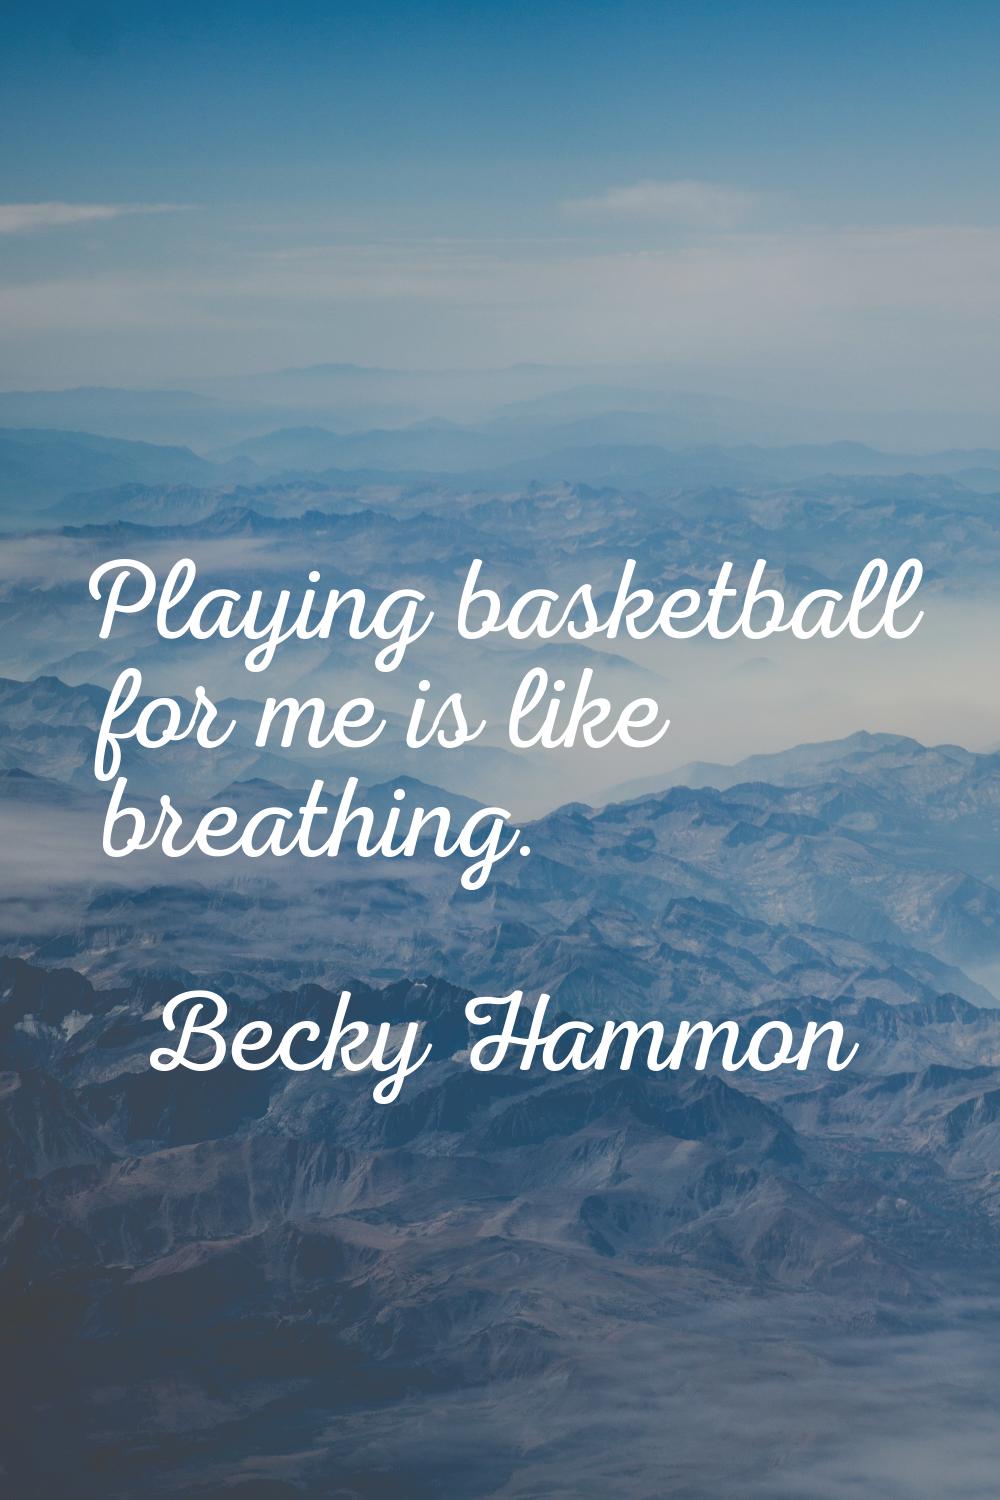 Playing basketball for me is like breathing.